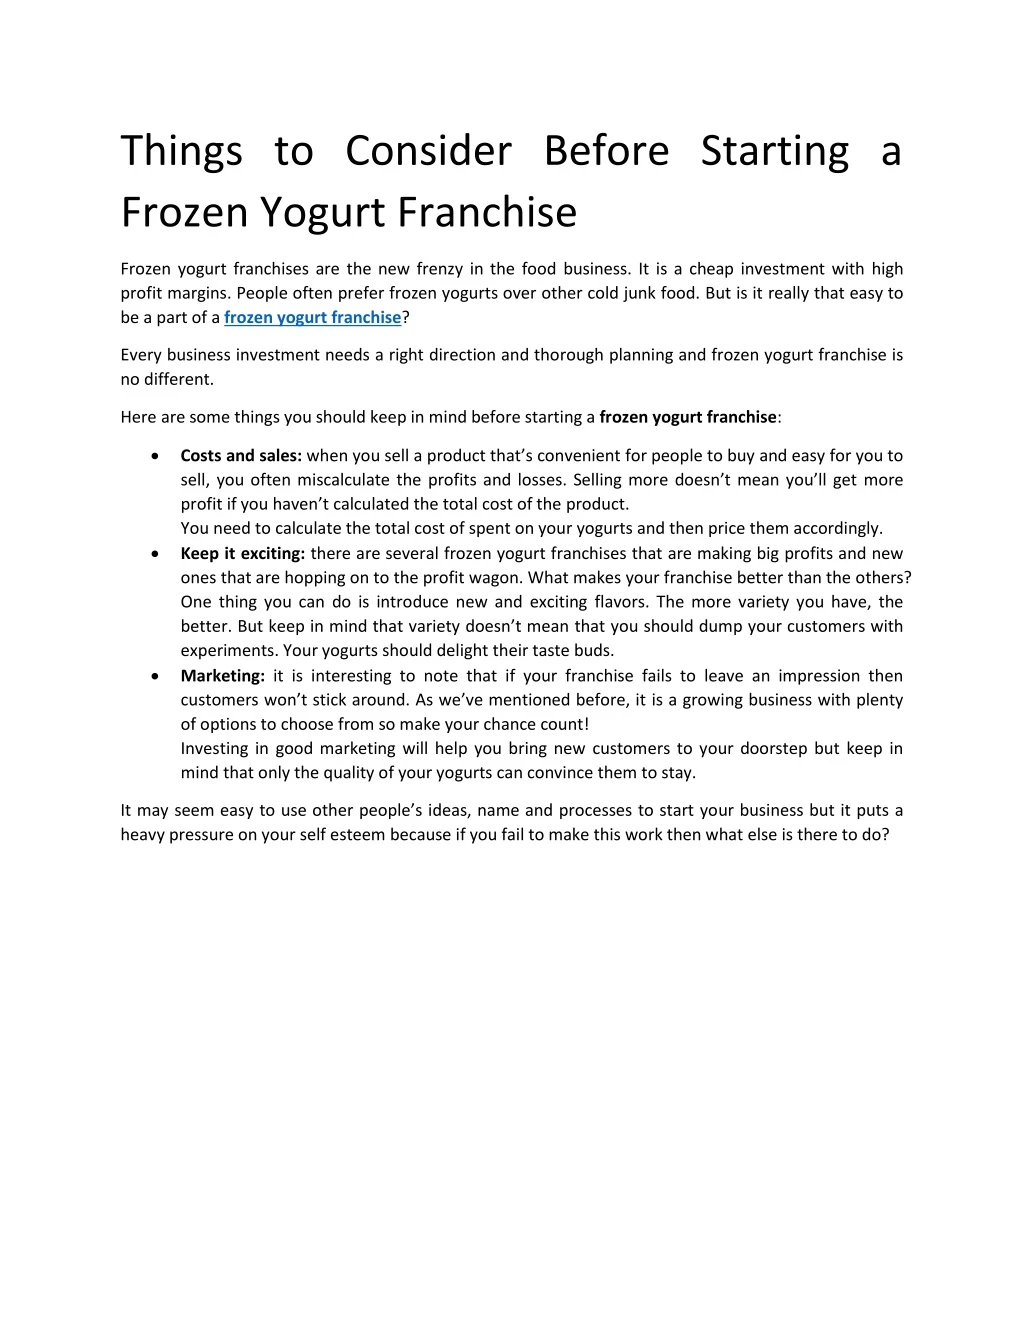 things to consider before starting a frozen